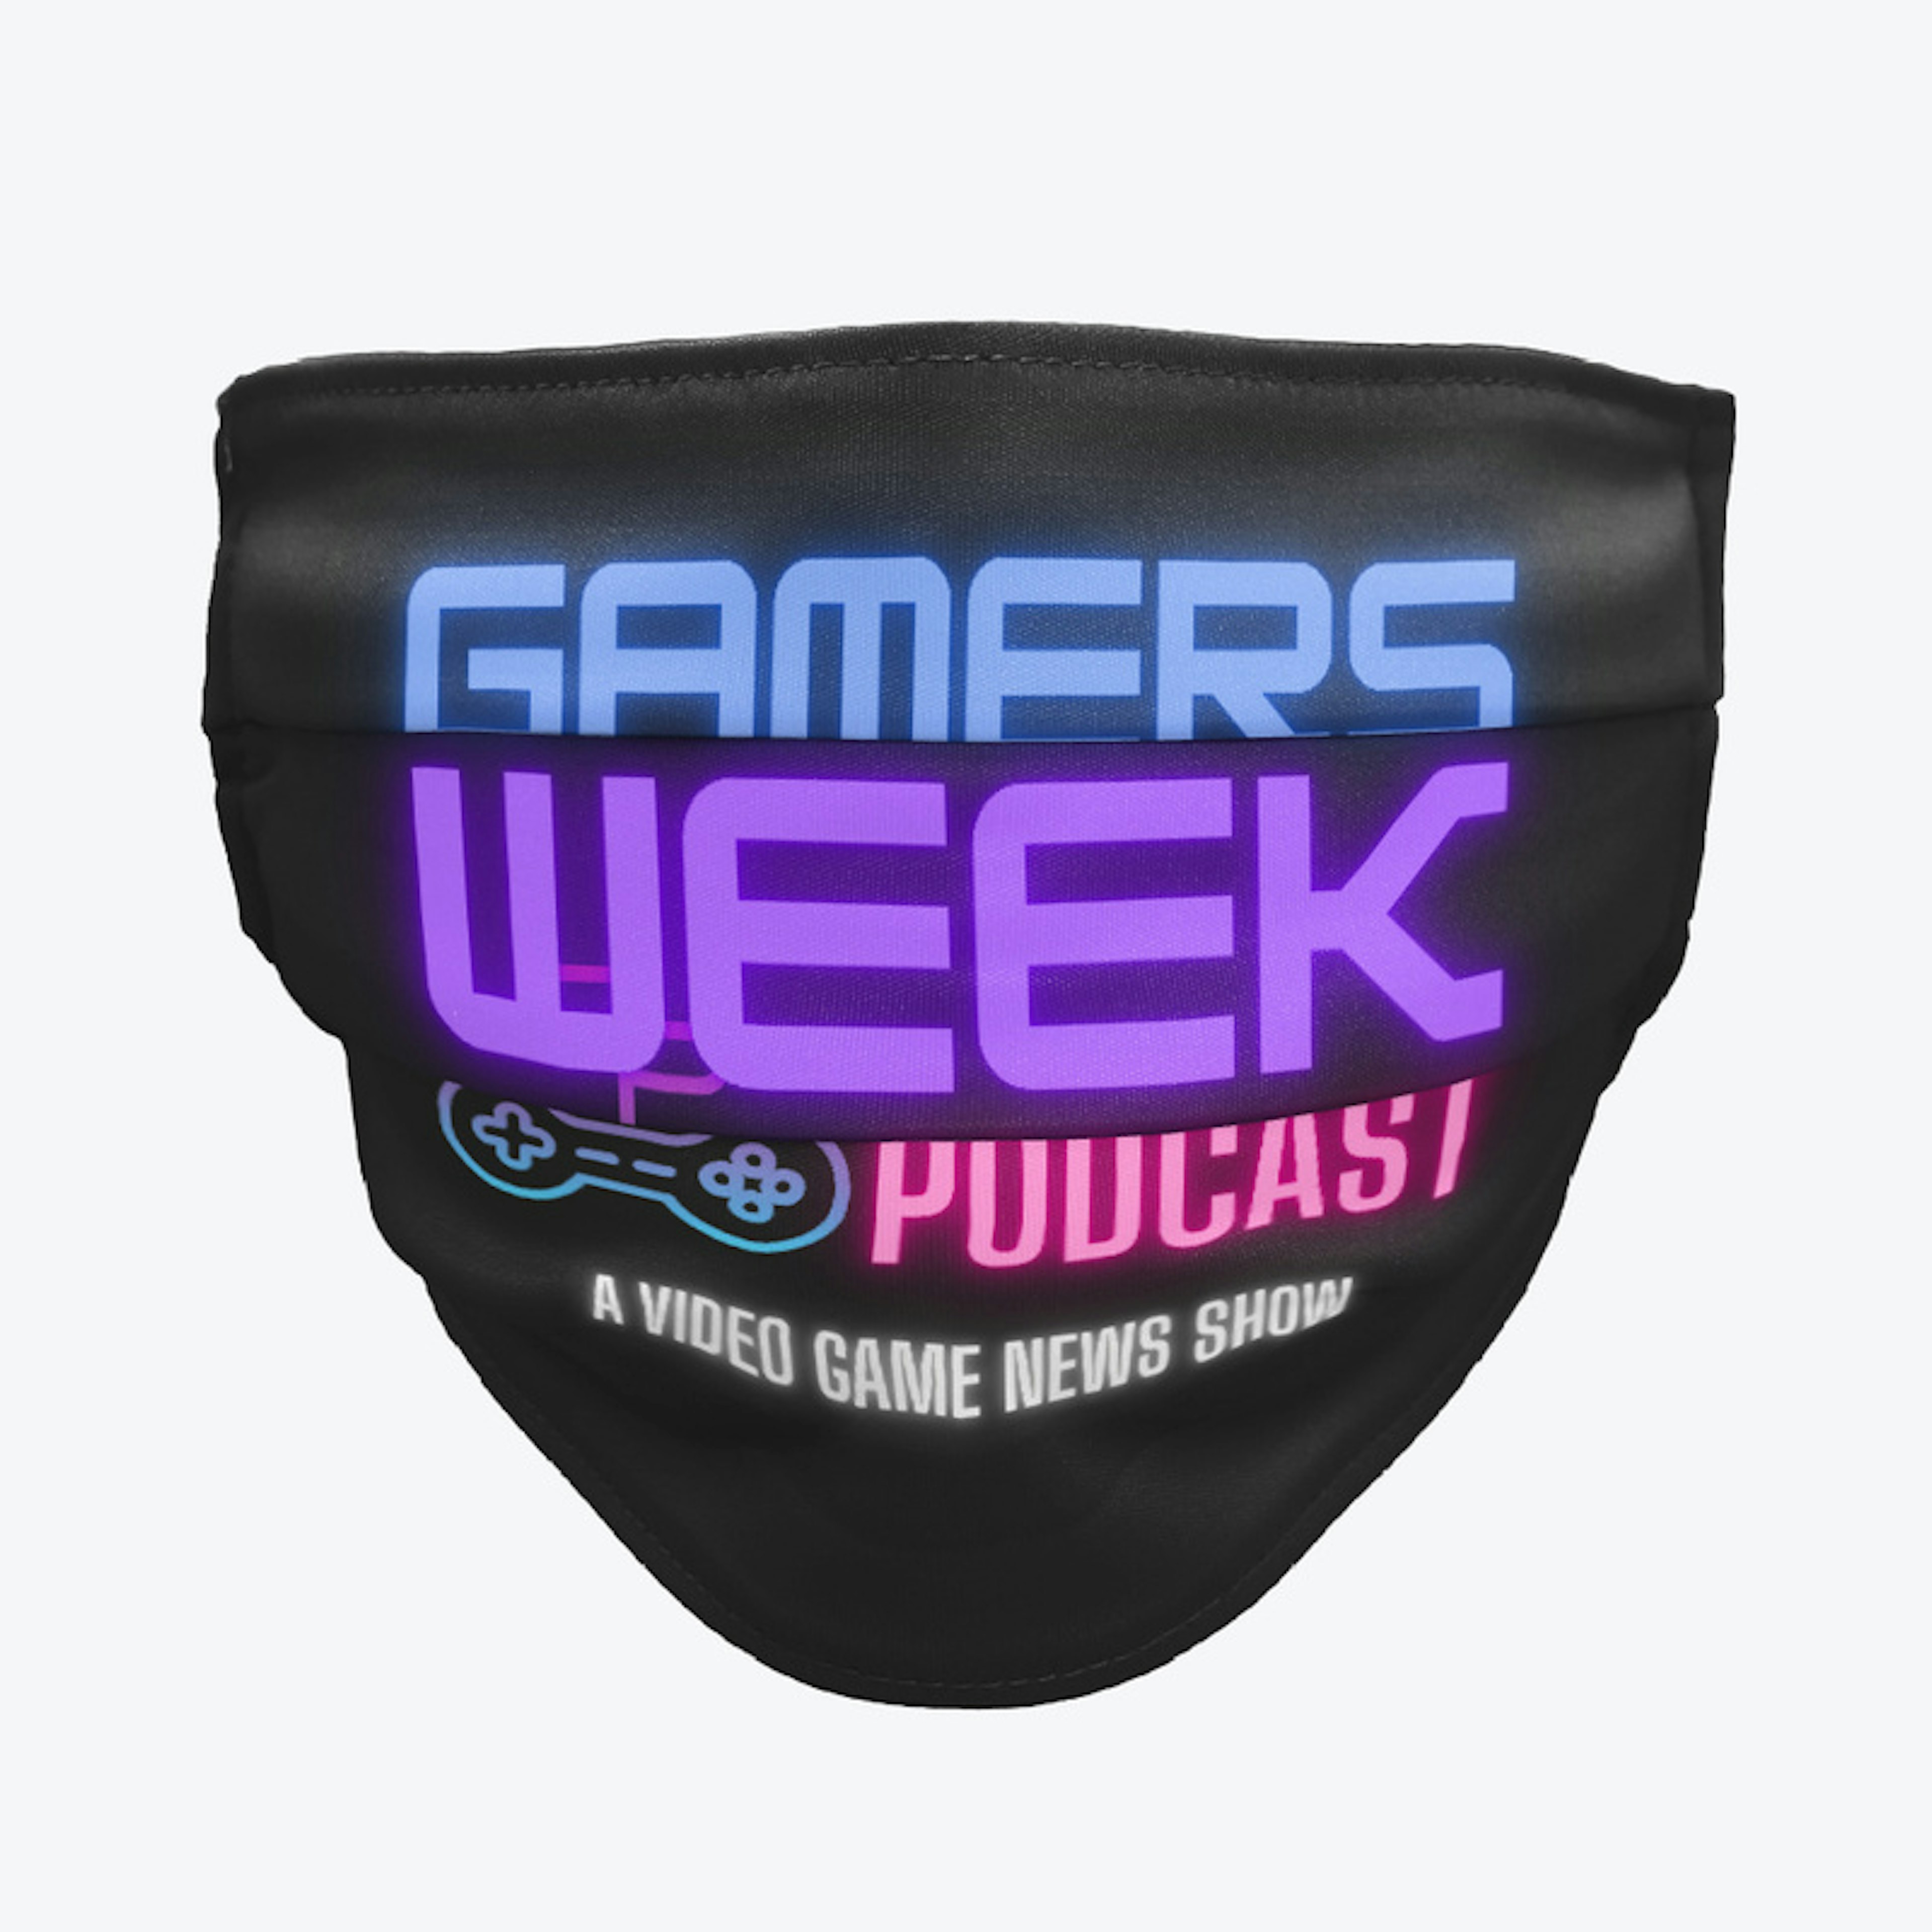 Gamers Week Podcast Face Mask